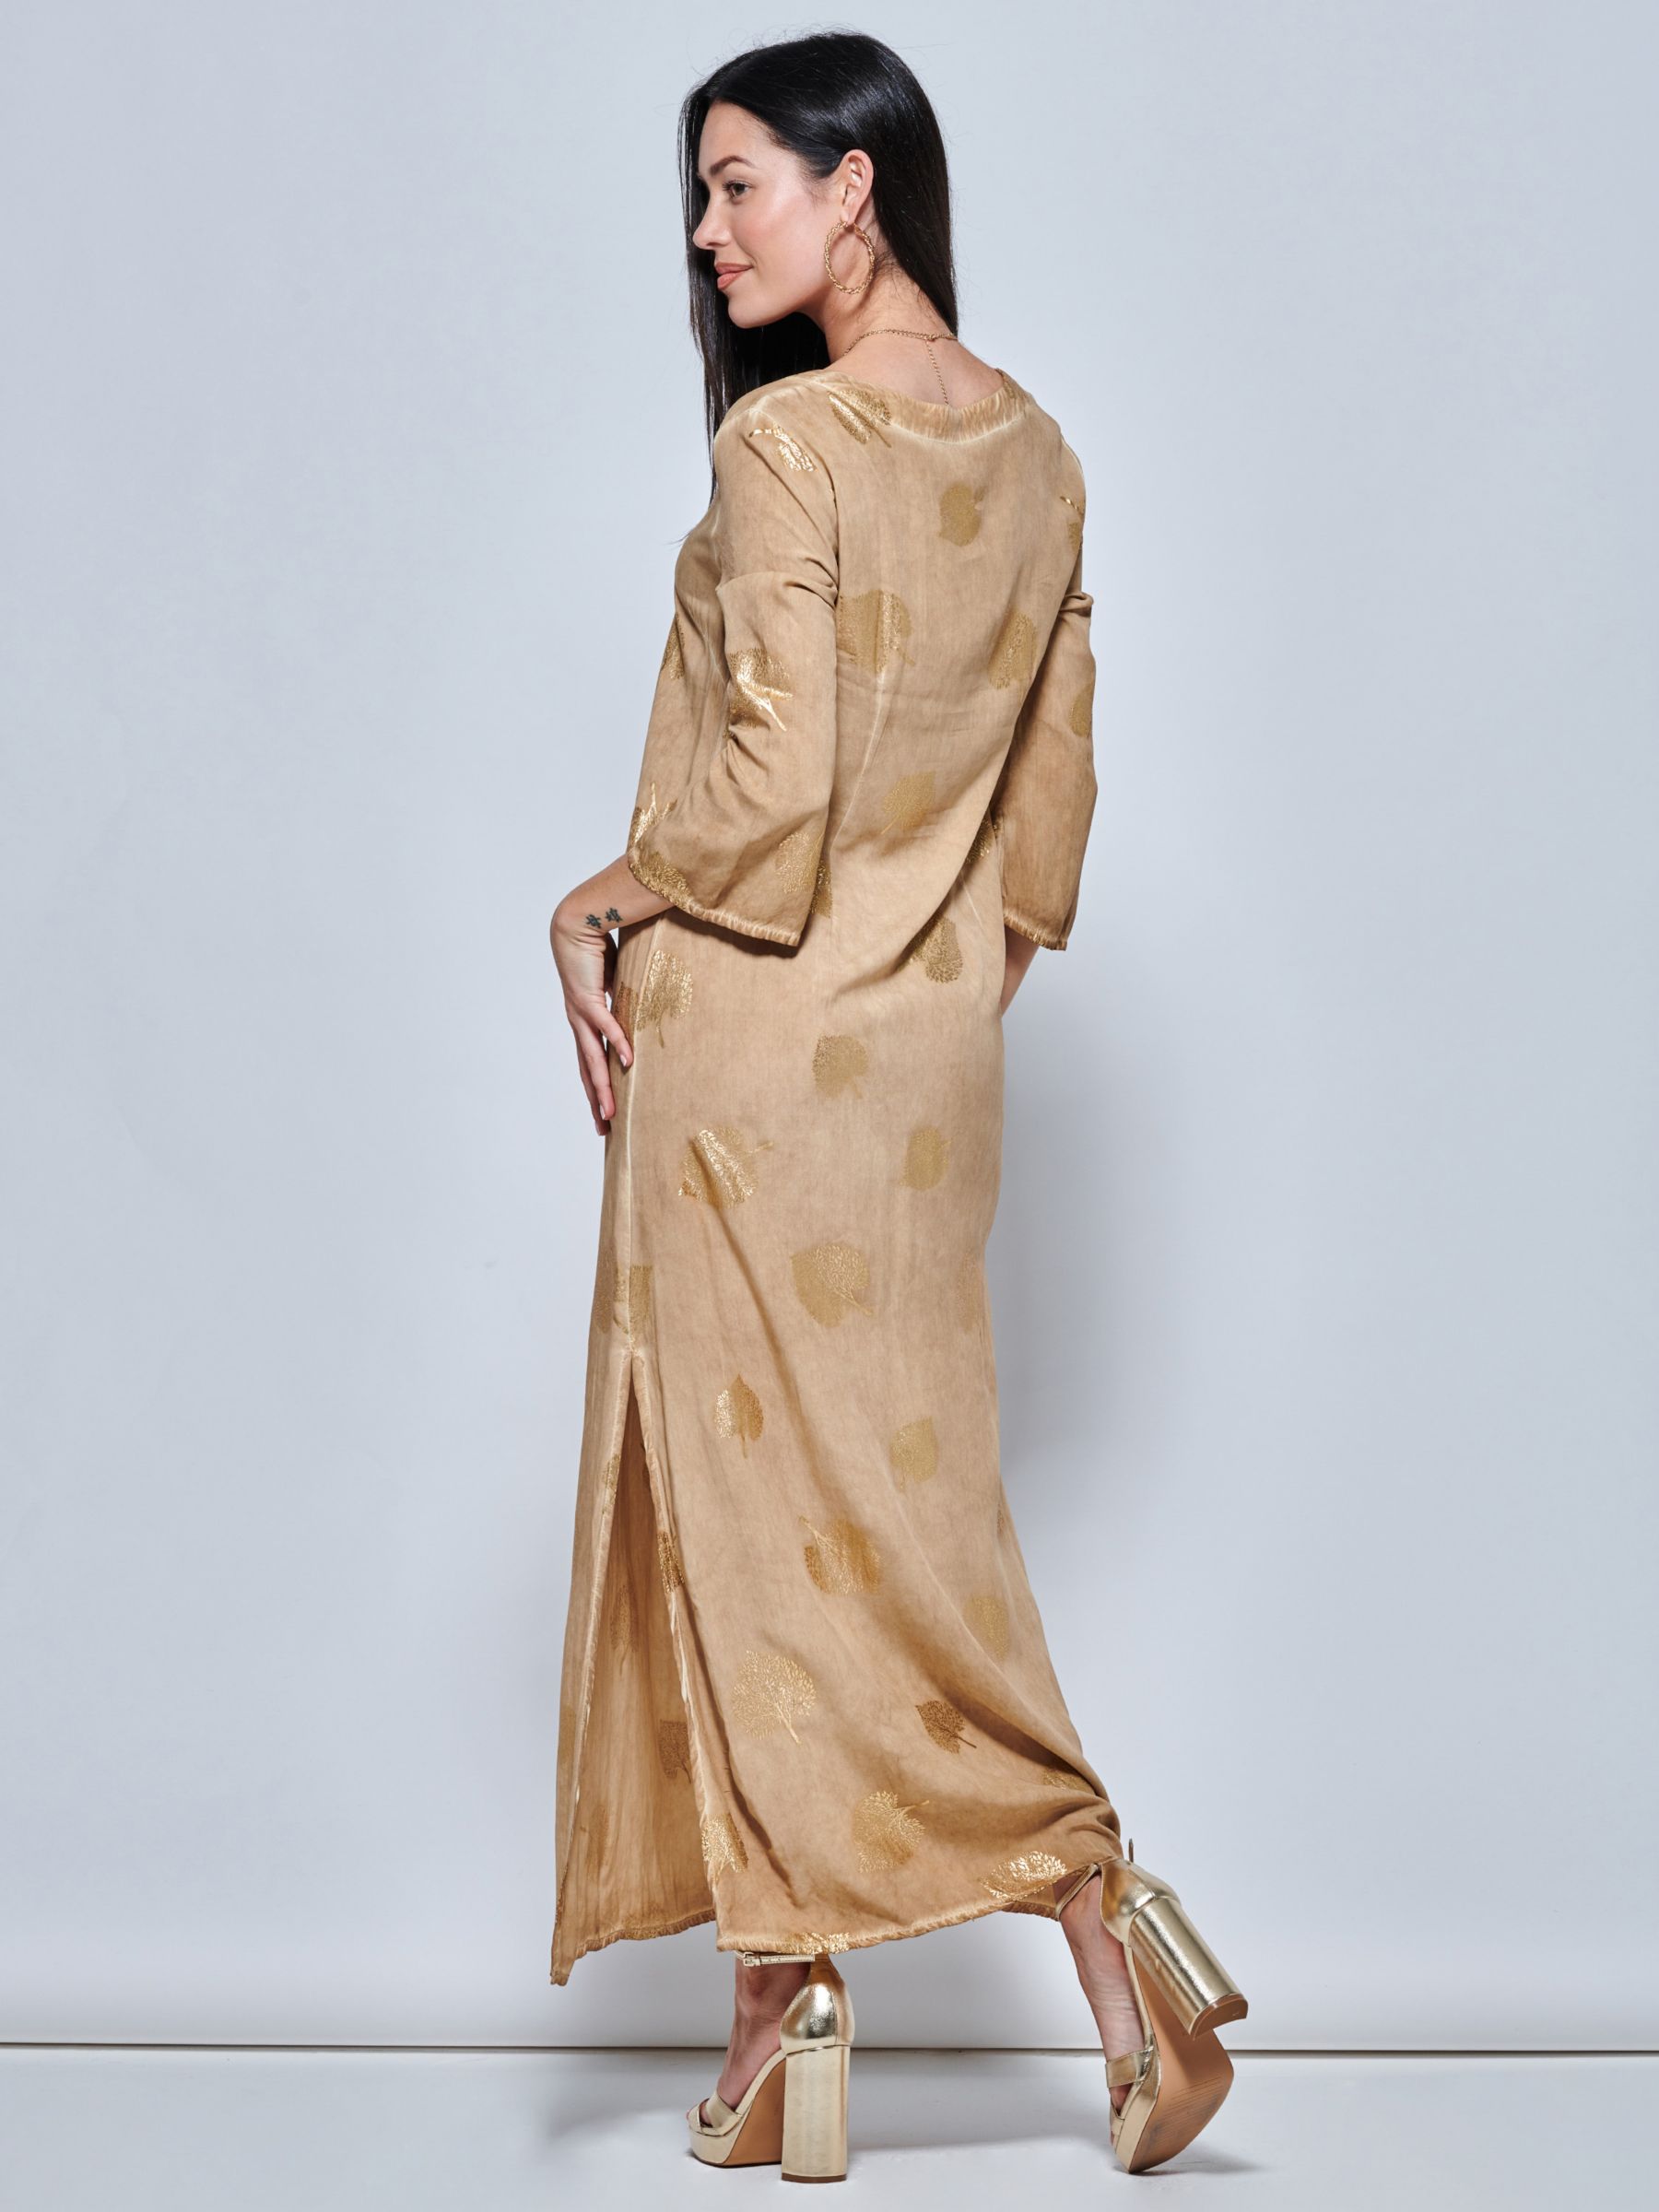 Buy Jolie Moi  3/4 Sleeve Loose Fit Holiday Tunic Maxi Dress, Khaki Pattern Online at johnlewis.com